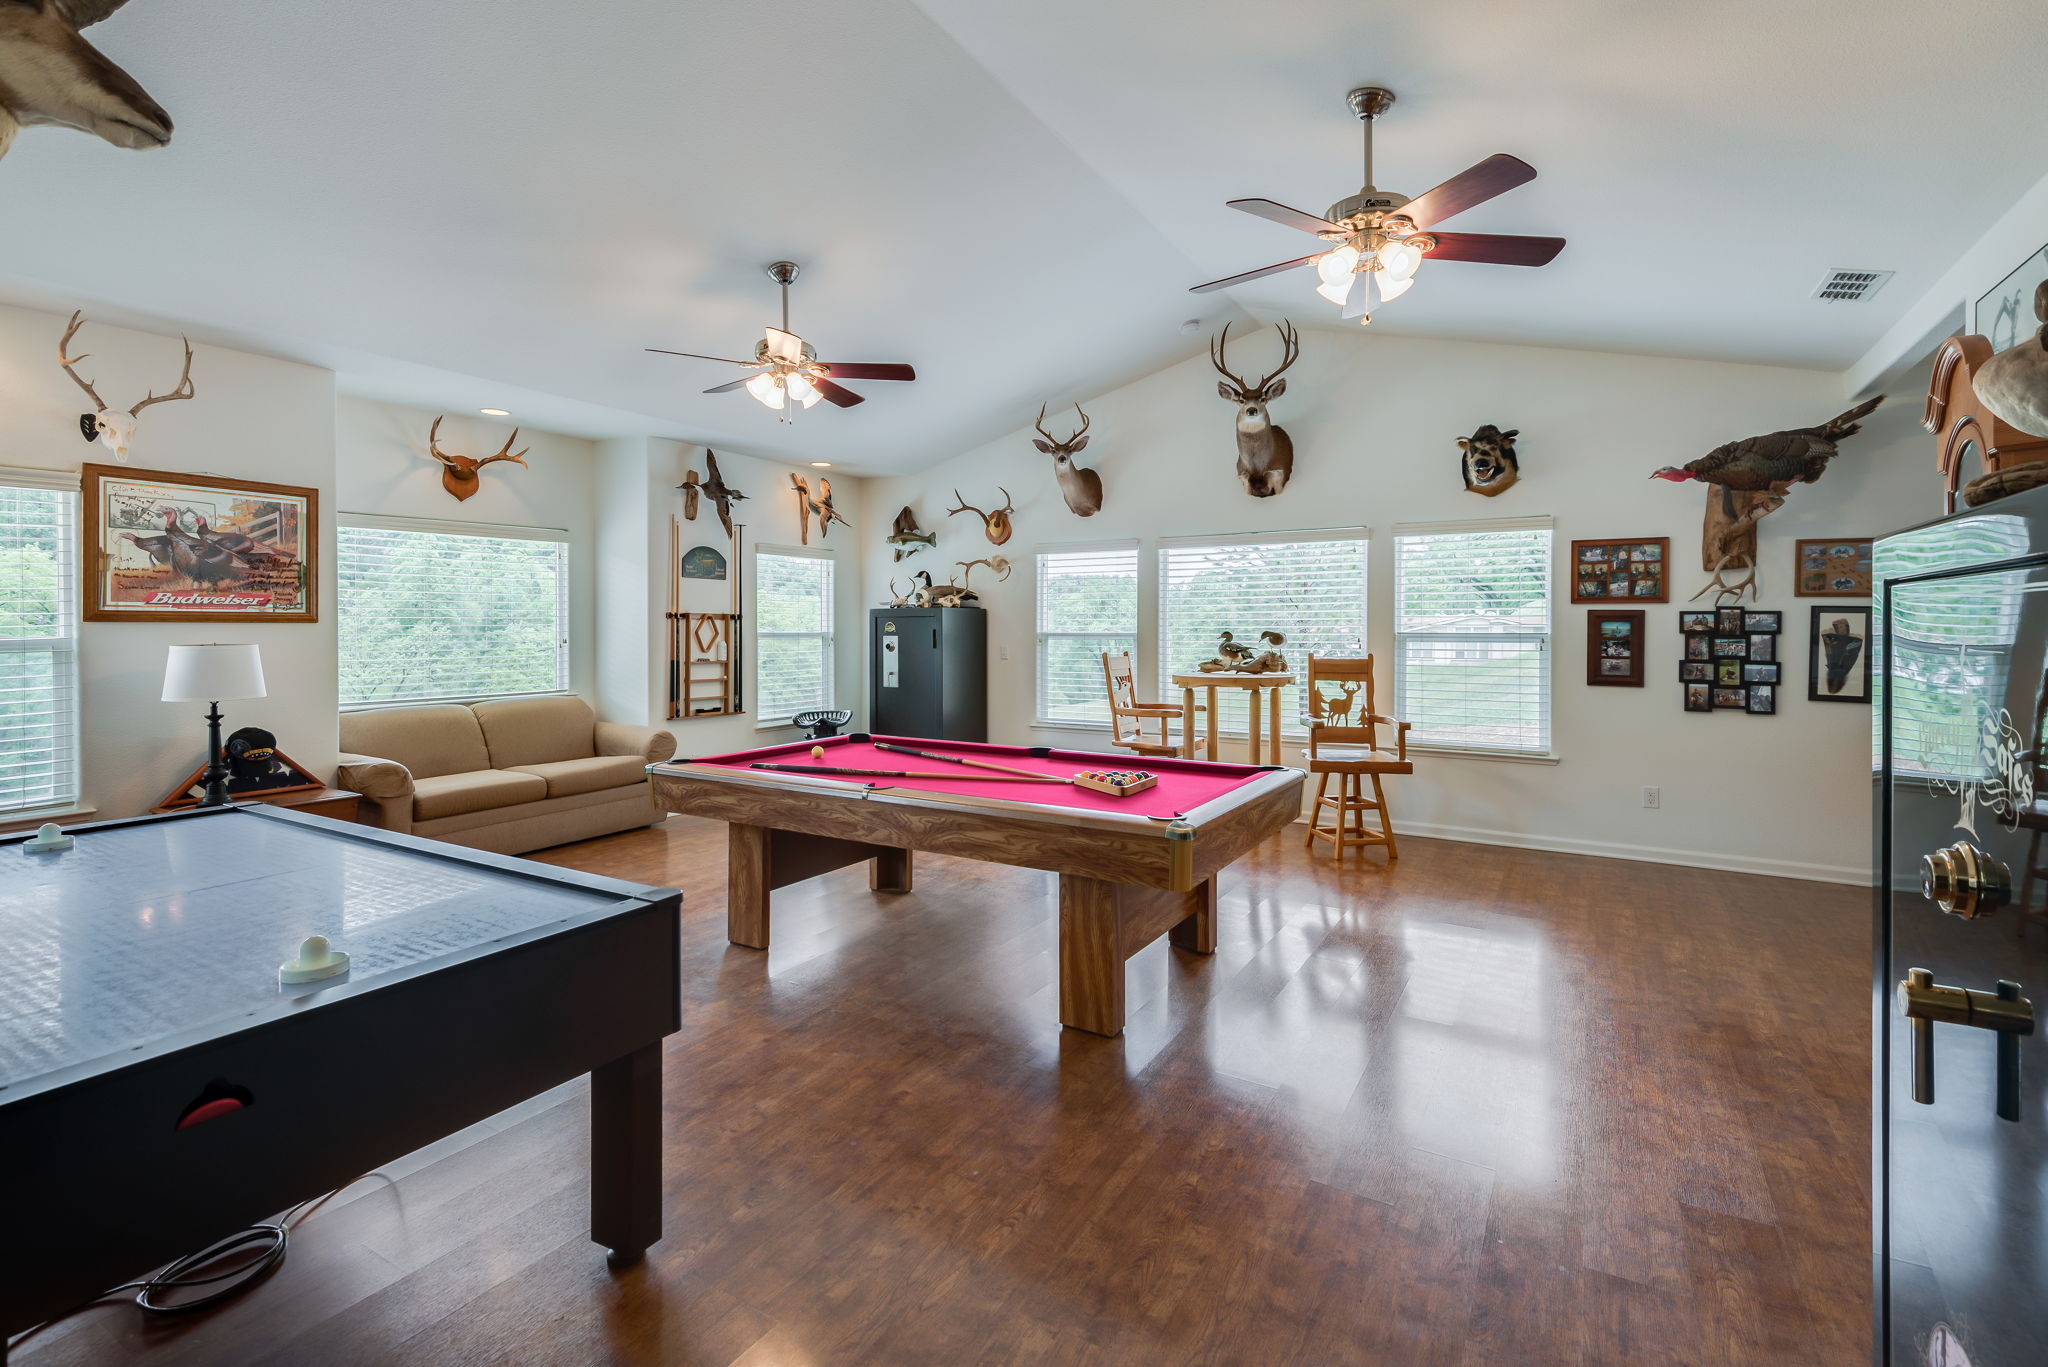 500 sq ft game room, Wet Bar with Hickory Cabinet and Granite Countertop, Large picture windows, Engineered Hardwood Flooring